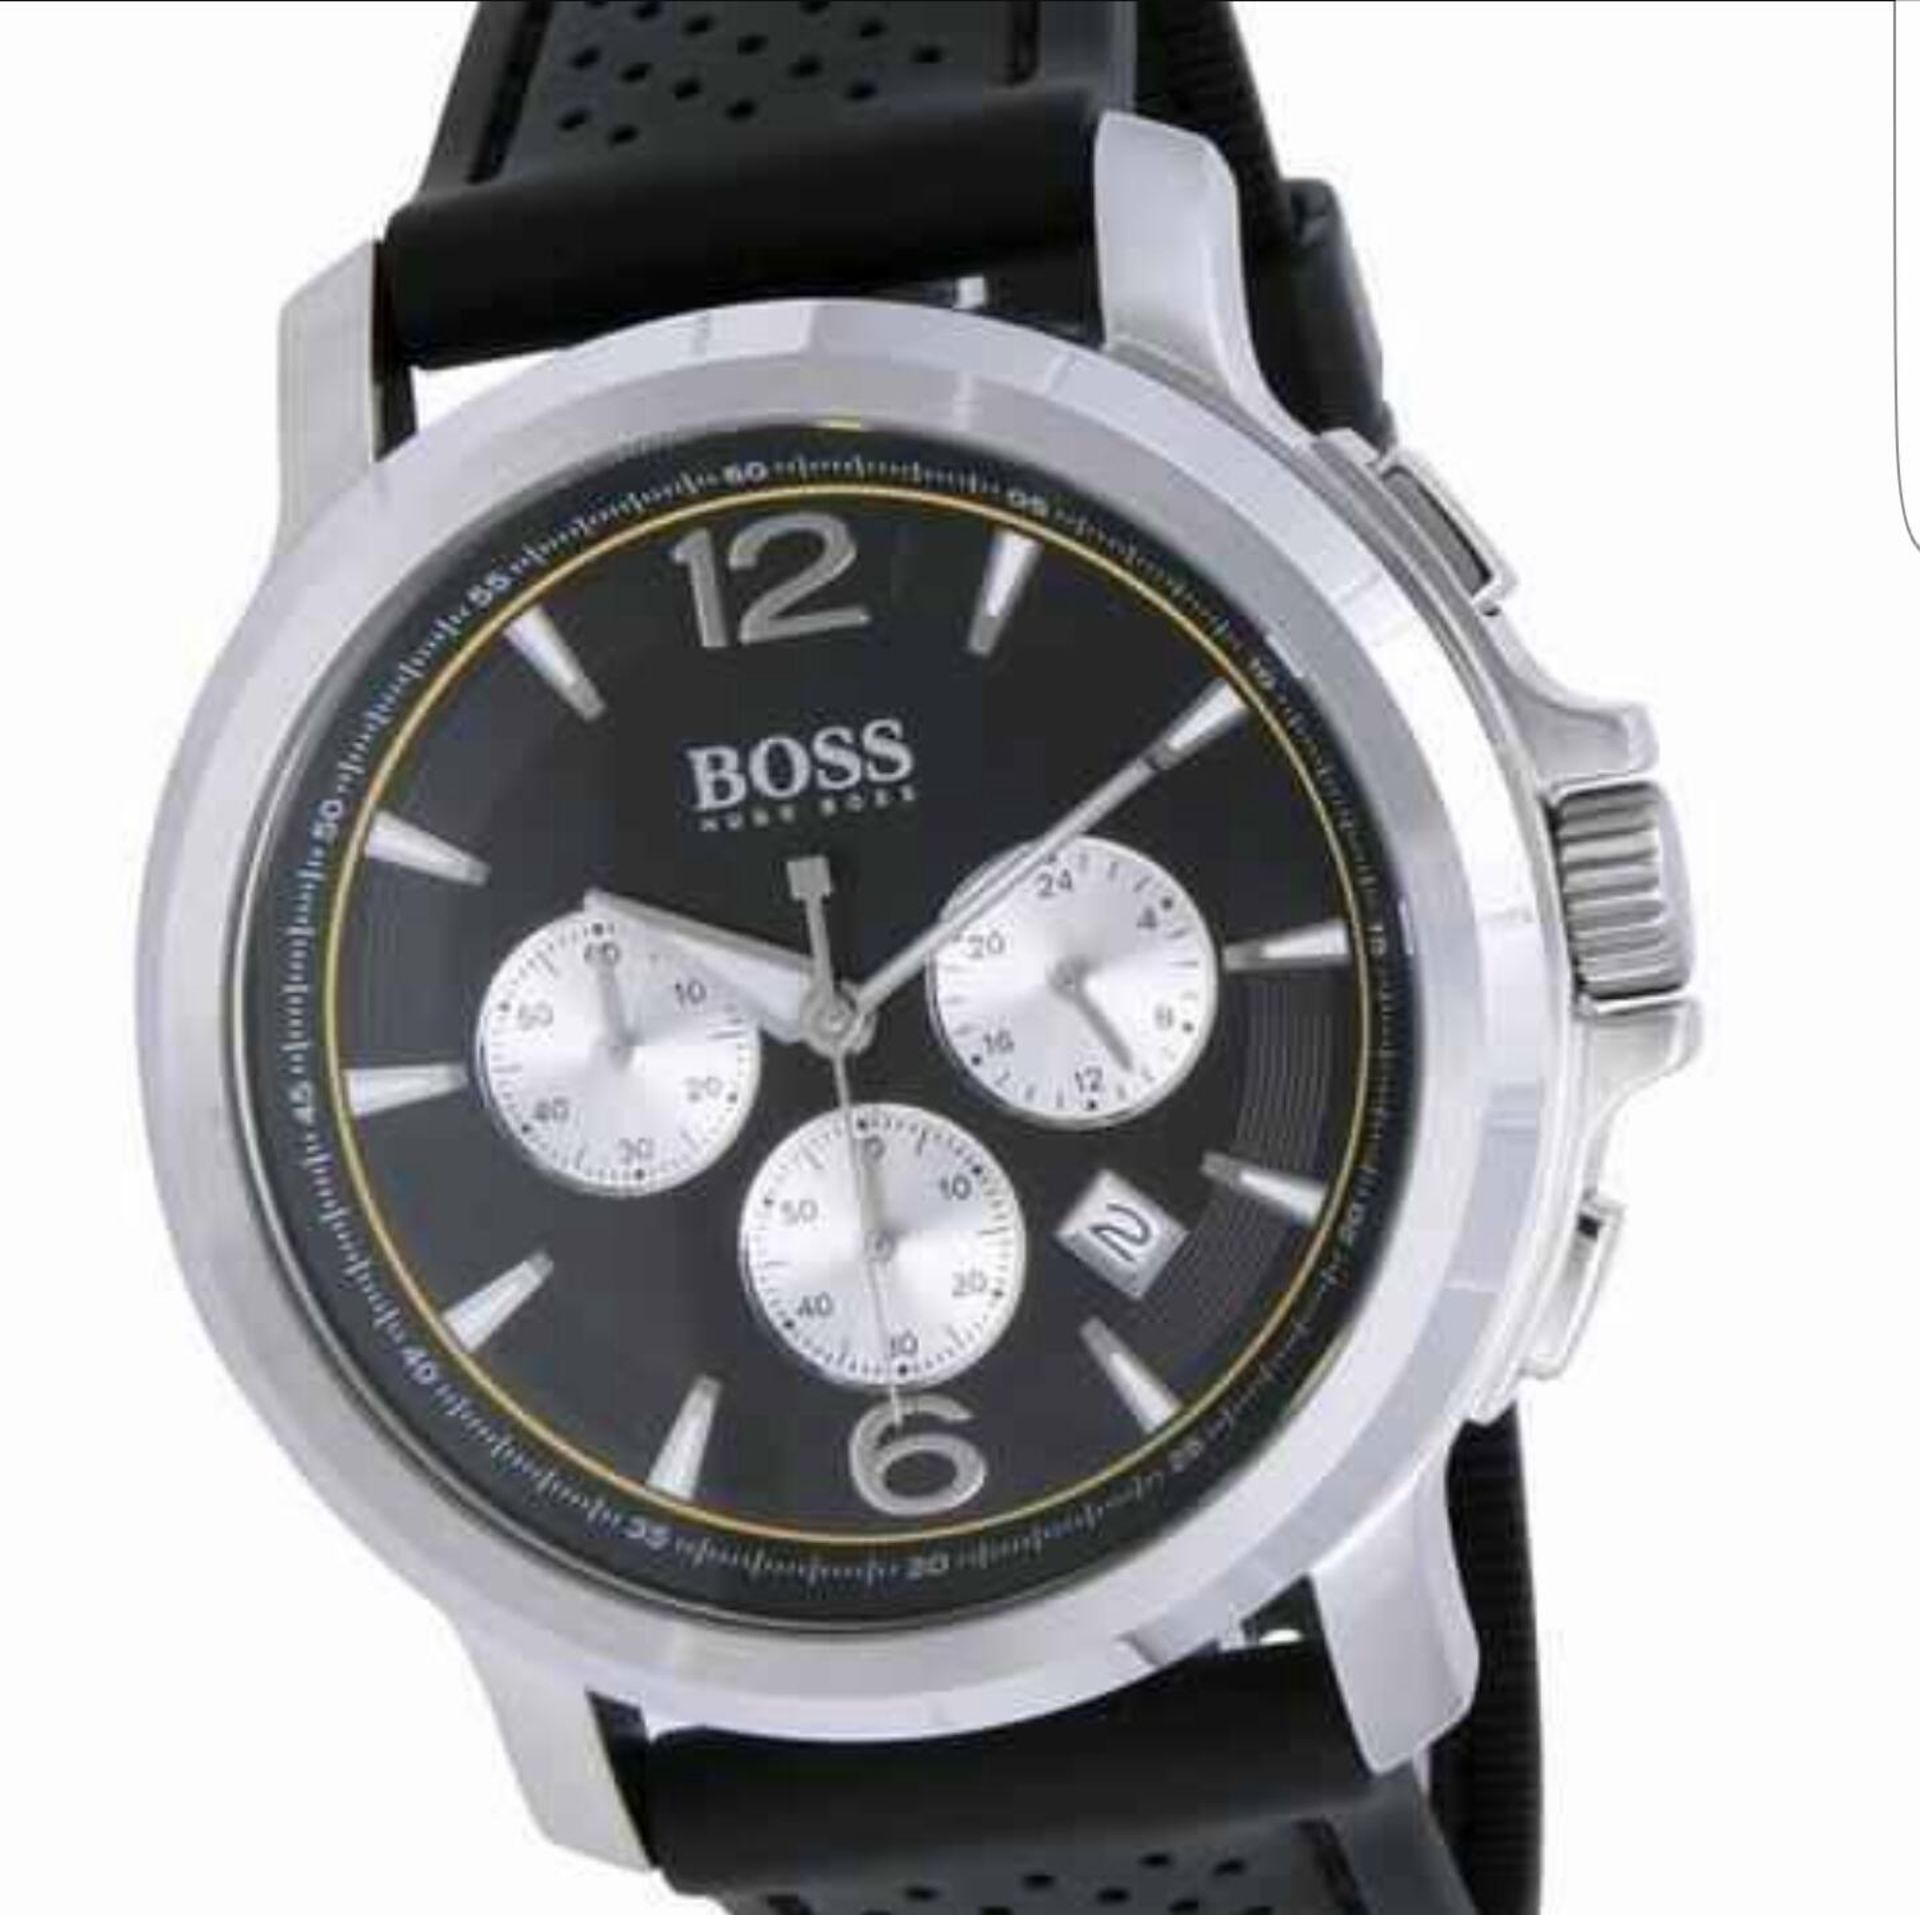 BRAND NEW HUGO BOSS 1512455, COMPLETE WITH ORIGINAL BOX AND MANUAL